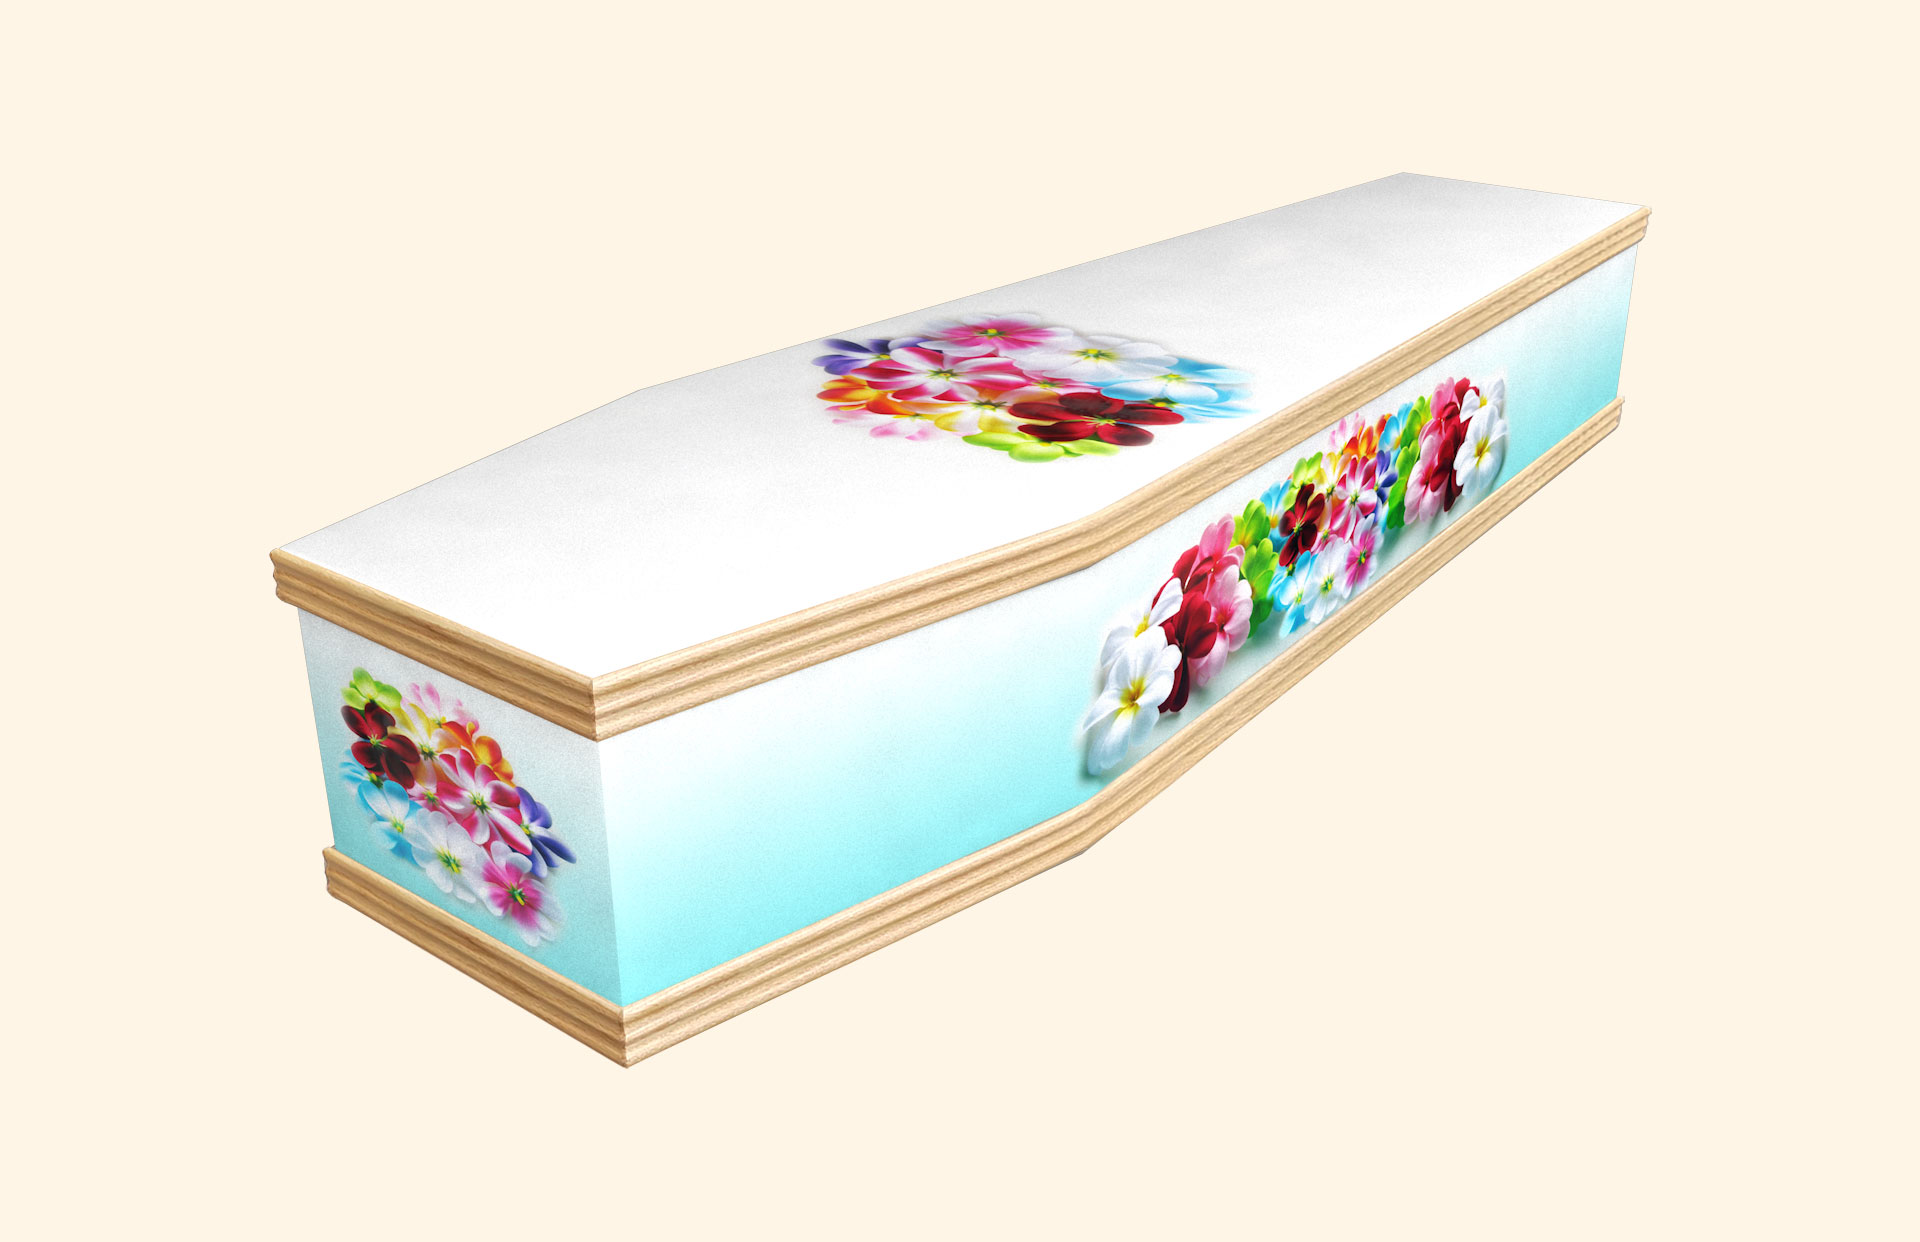 Simply Beautiful design on a classic coffin